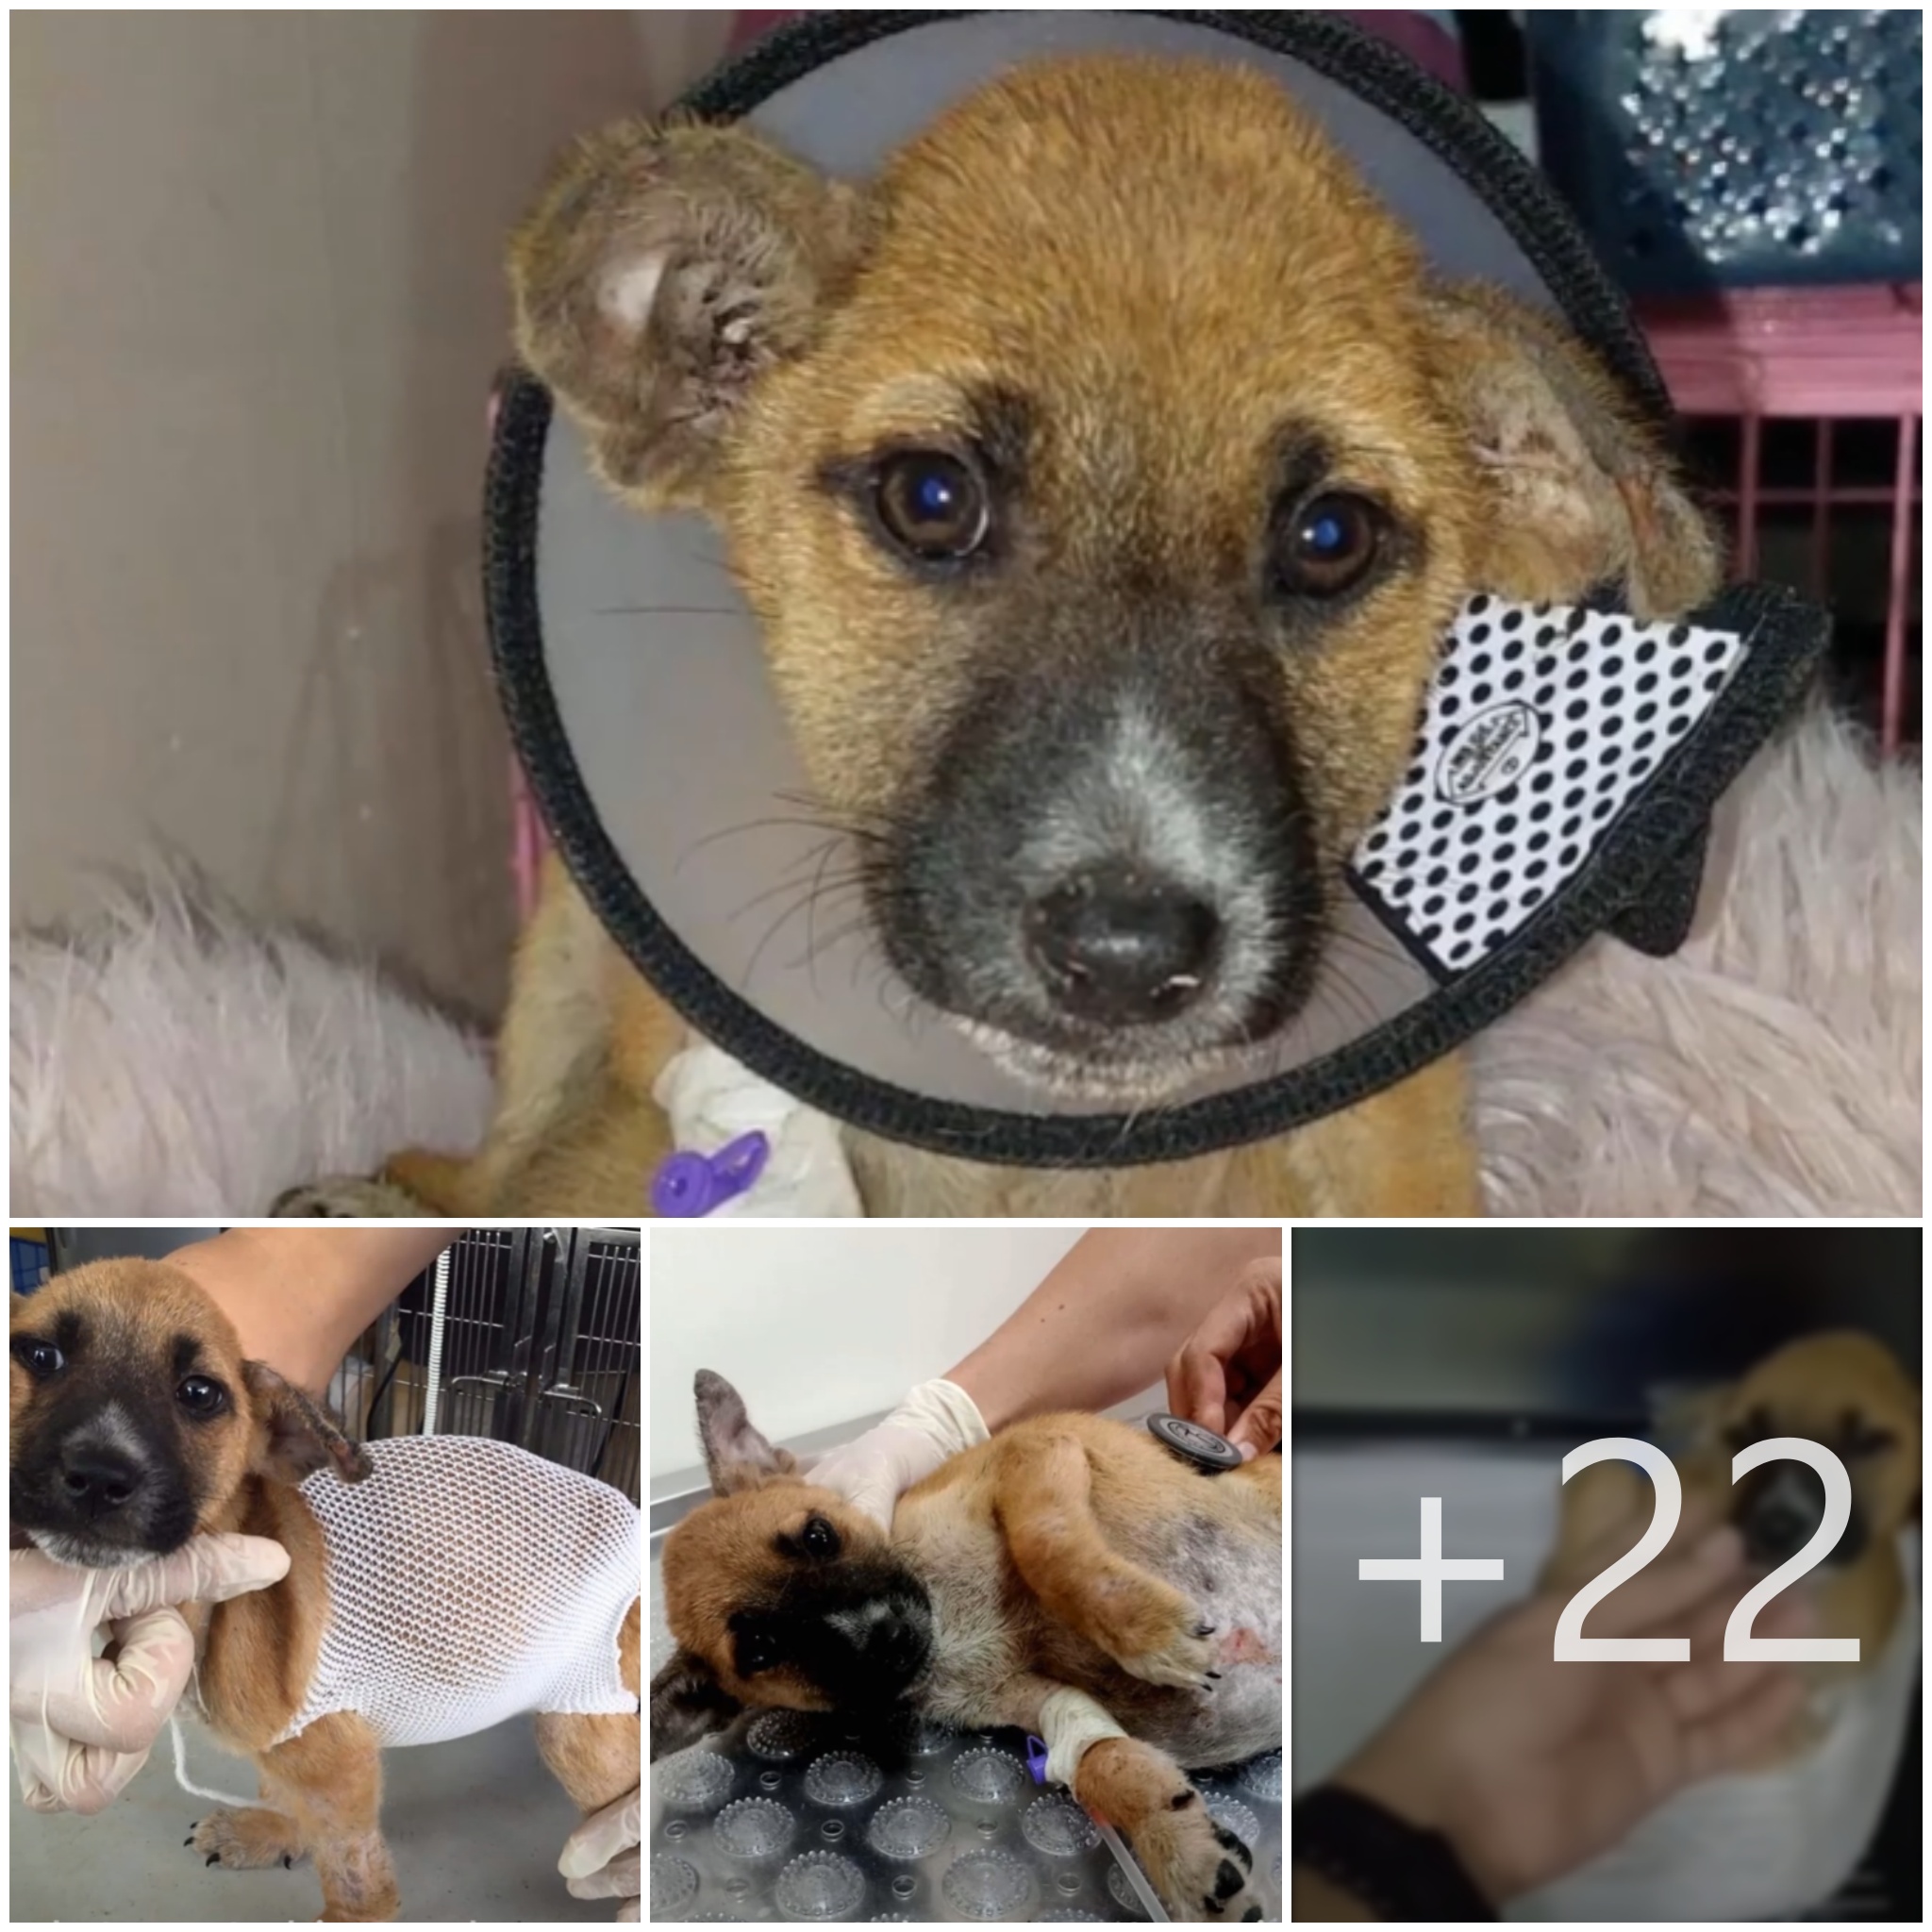 tho “Ticking a Ticking Time Bomb: A Severely Distended Stomach Raises Concerns About the Dog’s Health, Escalating the Situation and Leaving Netizens Worried” tho